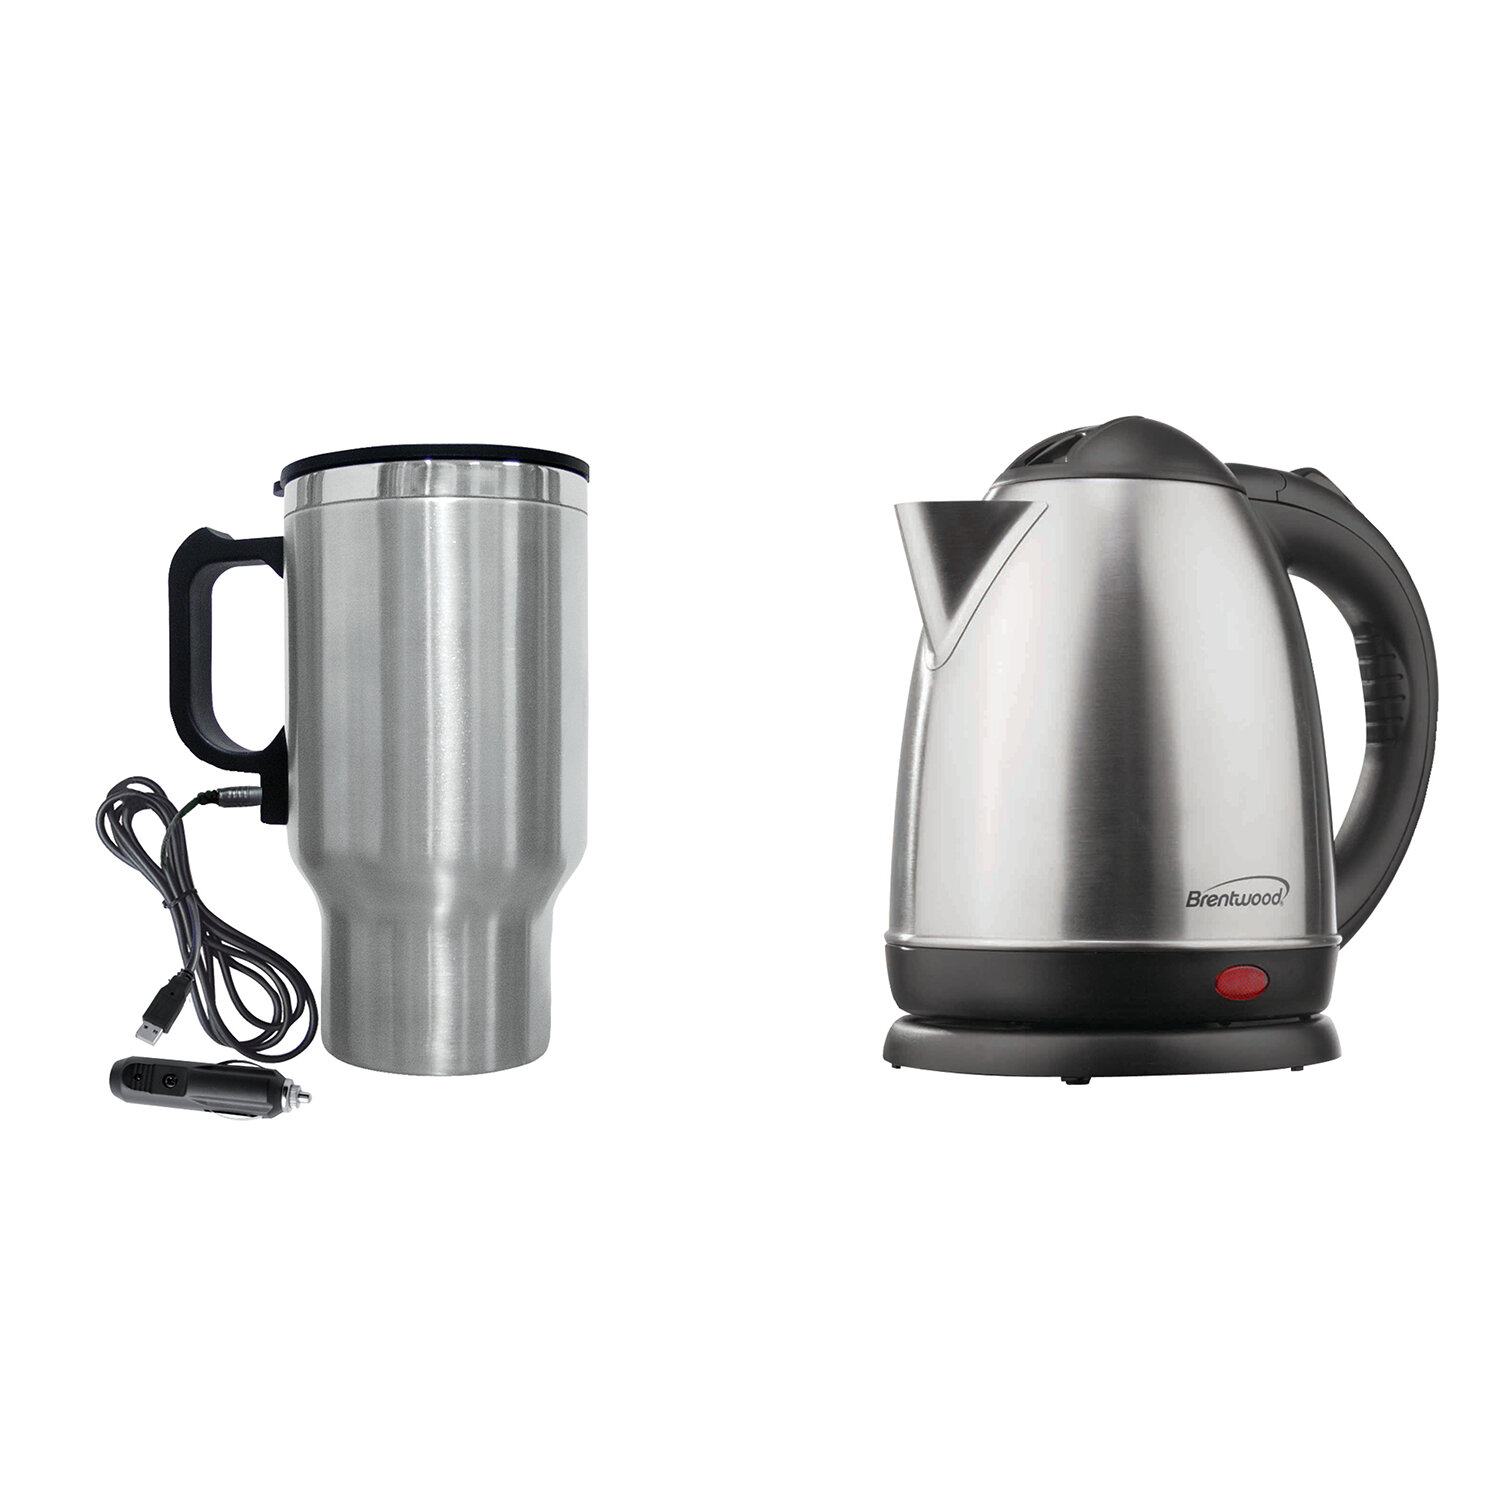 Brentwood Appliances 1.58 Quarts Stainless Steel Electric Tea Kettle